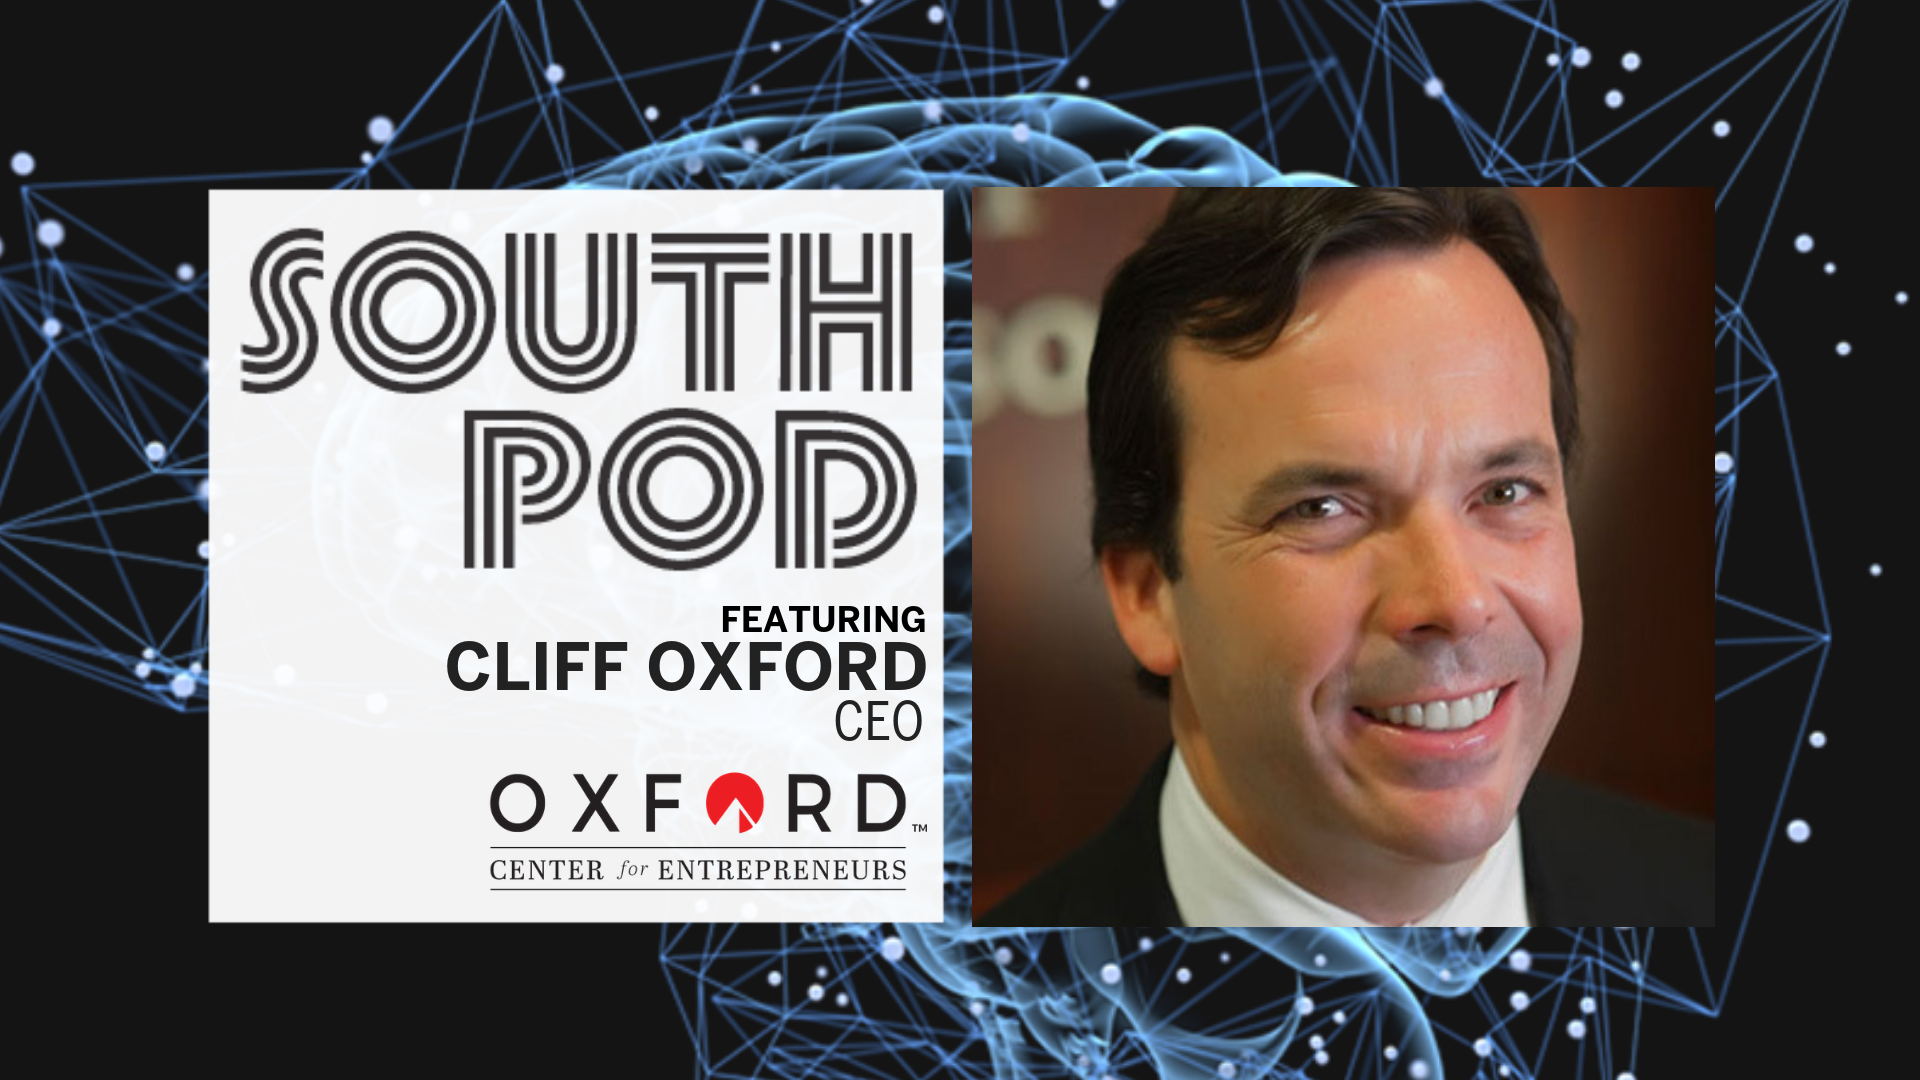 Atlanta’s Oxford Entrepreneur Center CEO Cliff Oxford Shares Insider Tips on Mergers & Acquisitions